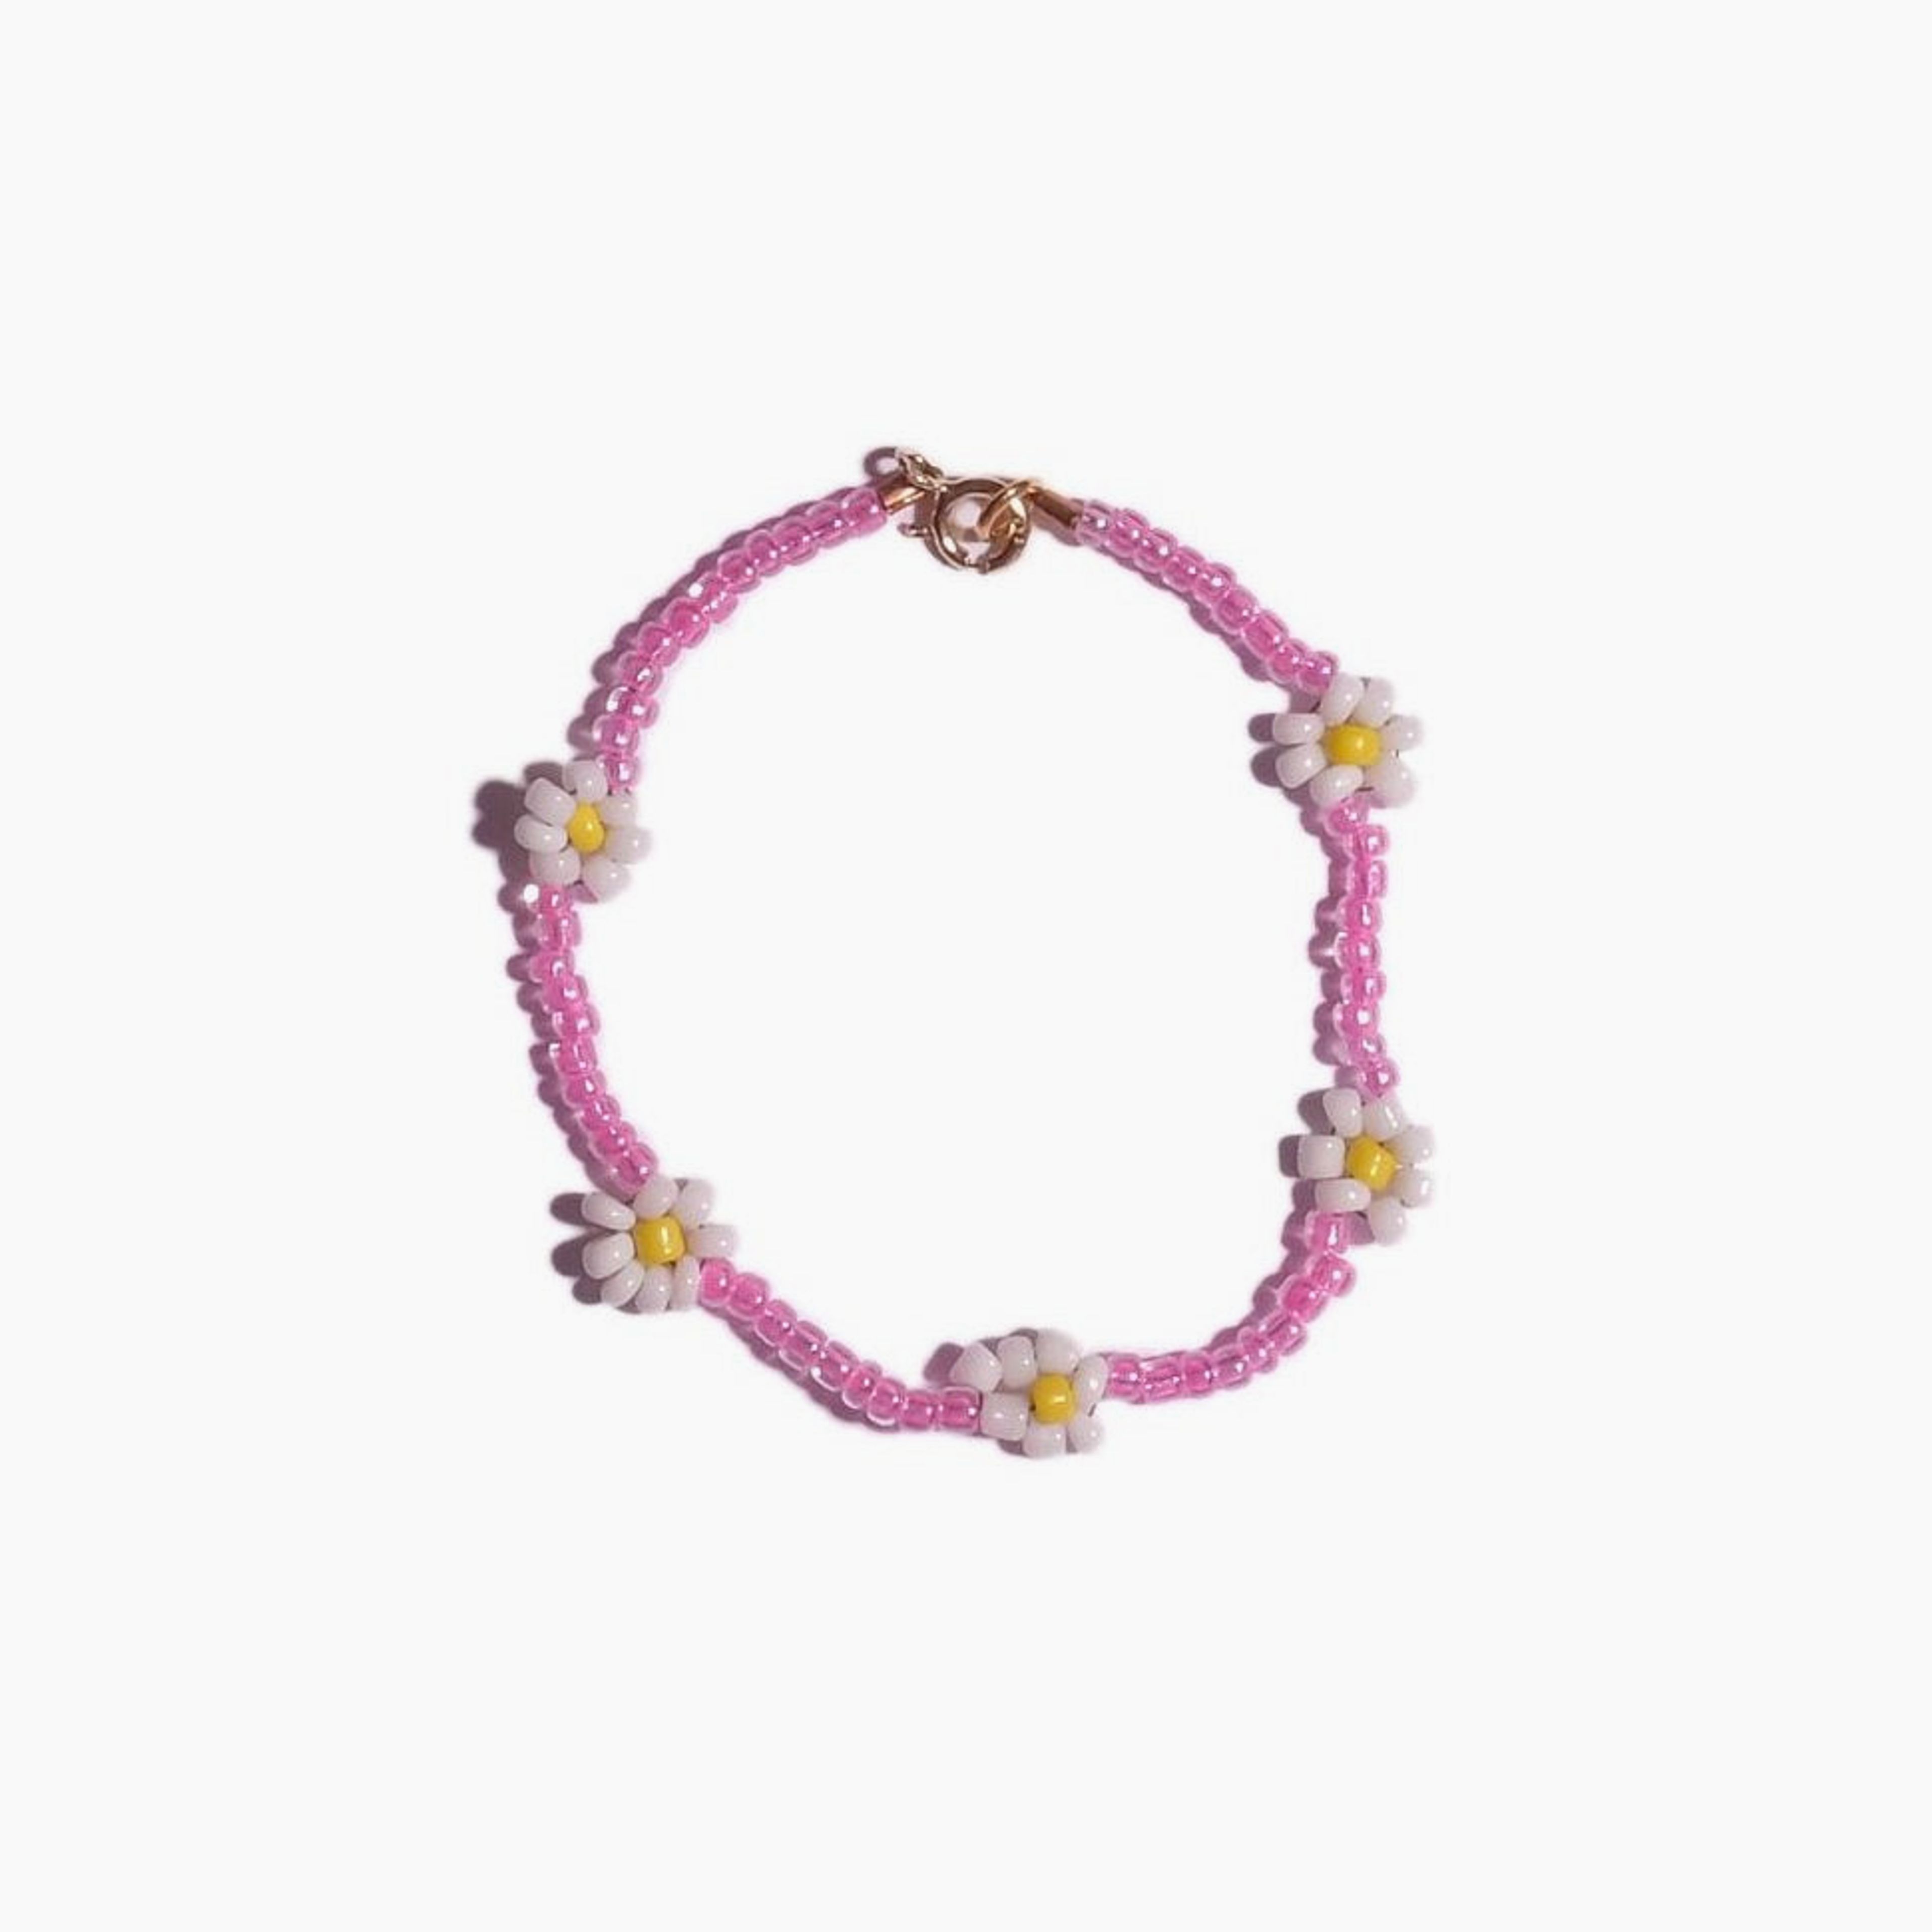 Daisy Chain Bracelet, Pink With White Flowers